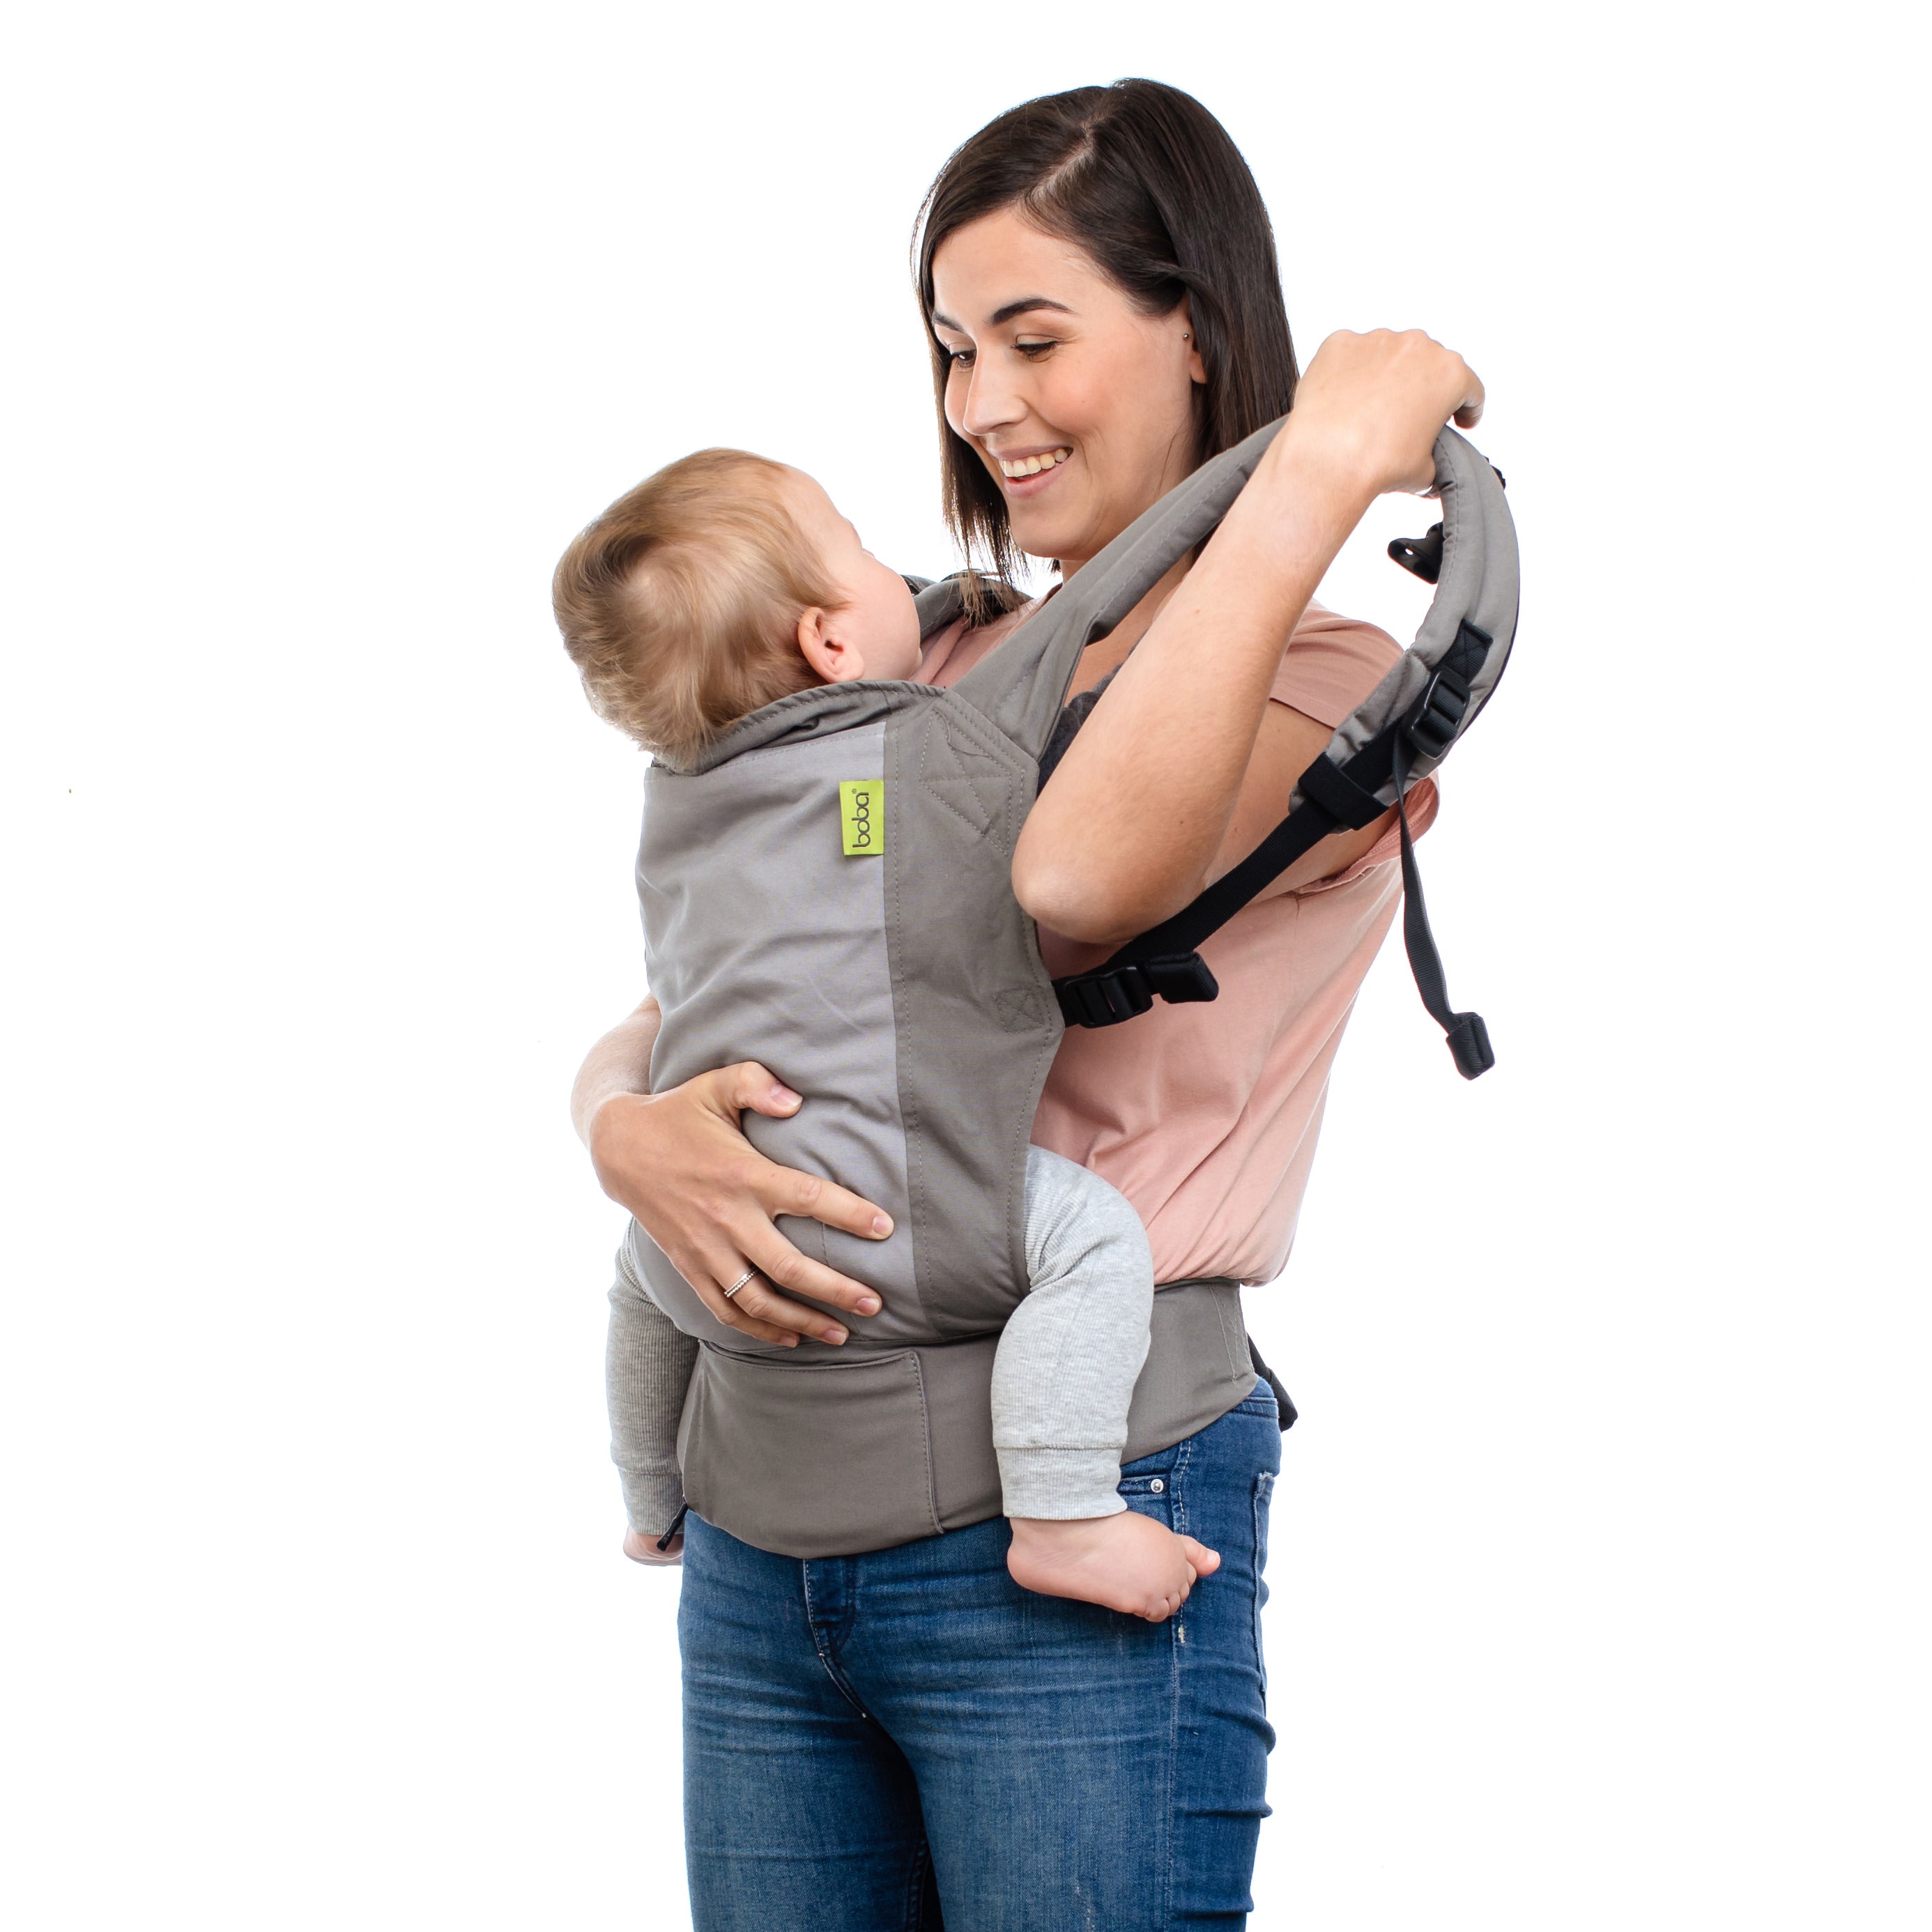 A joyful mama with brown short hair is putting her little boy in the front carry in the gray 4gs dusk infant carrier.